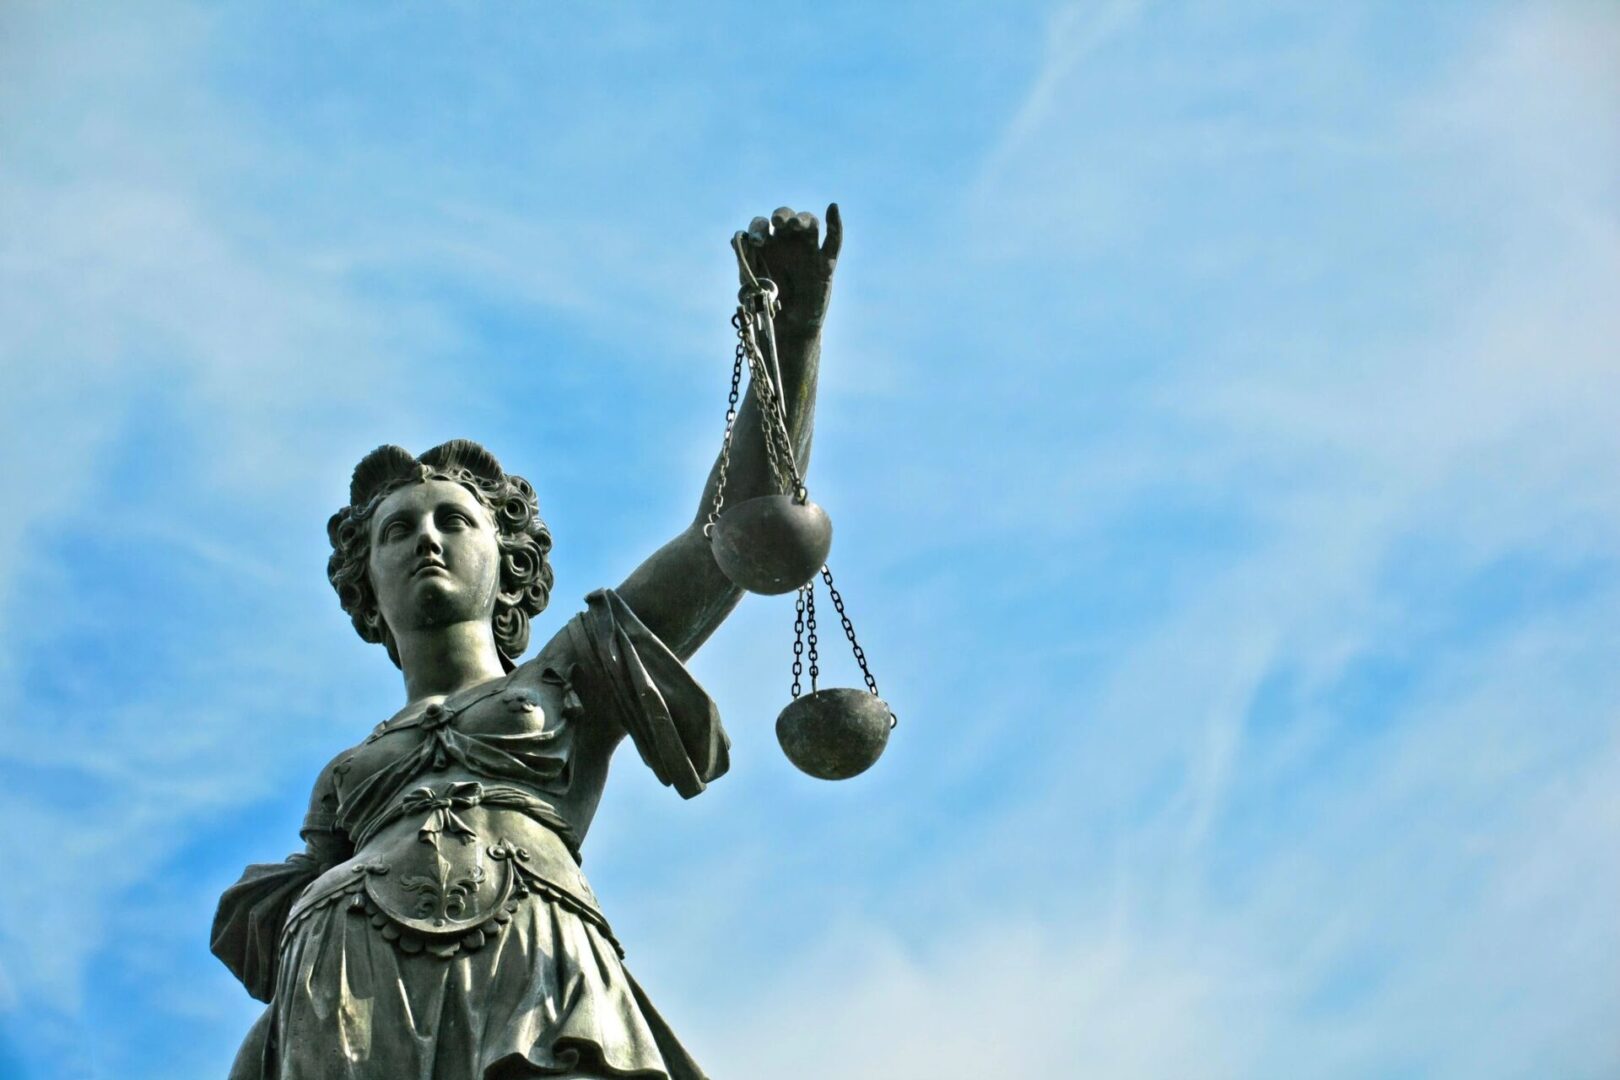 A statue of lady justice holding the balance in front of a blue sky.